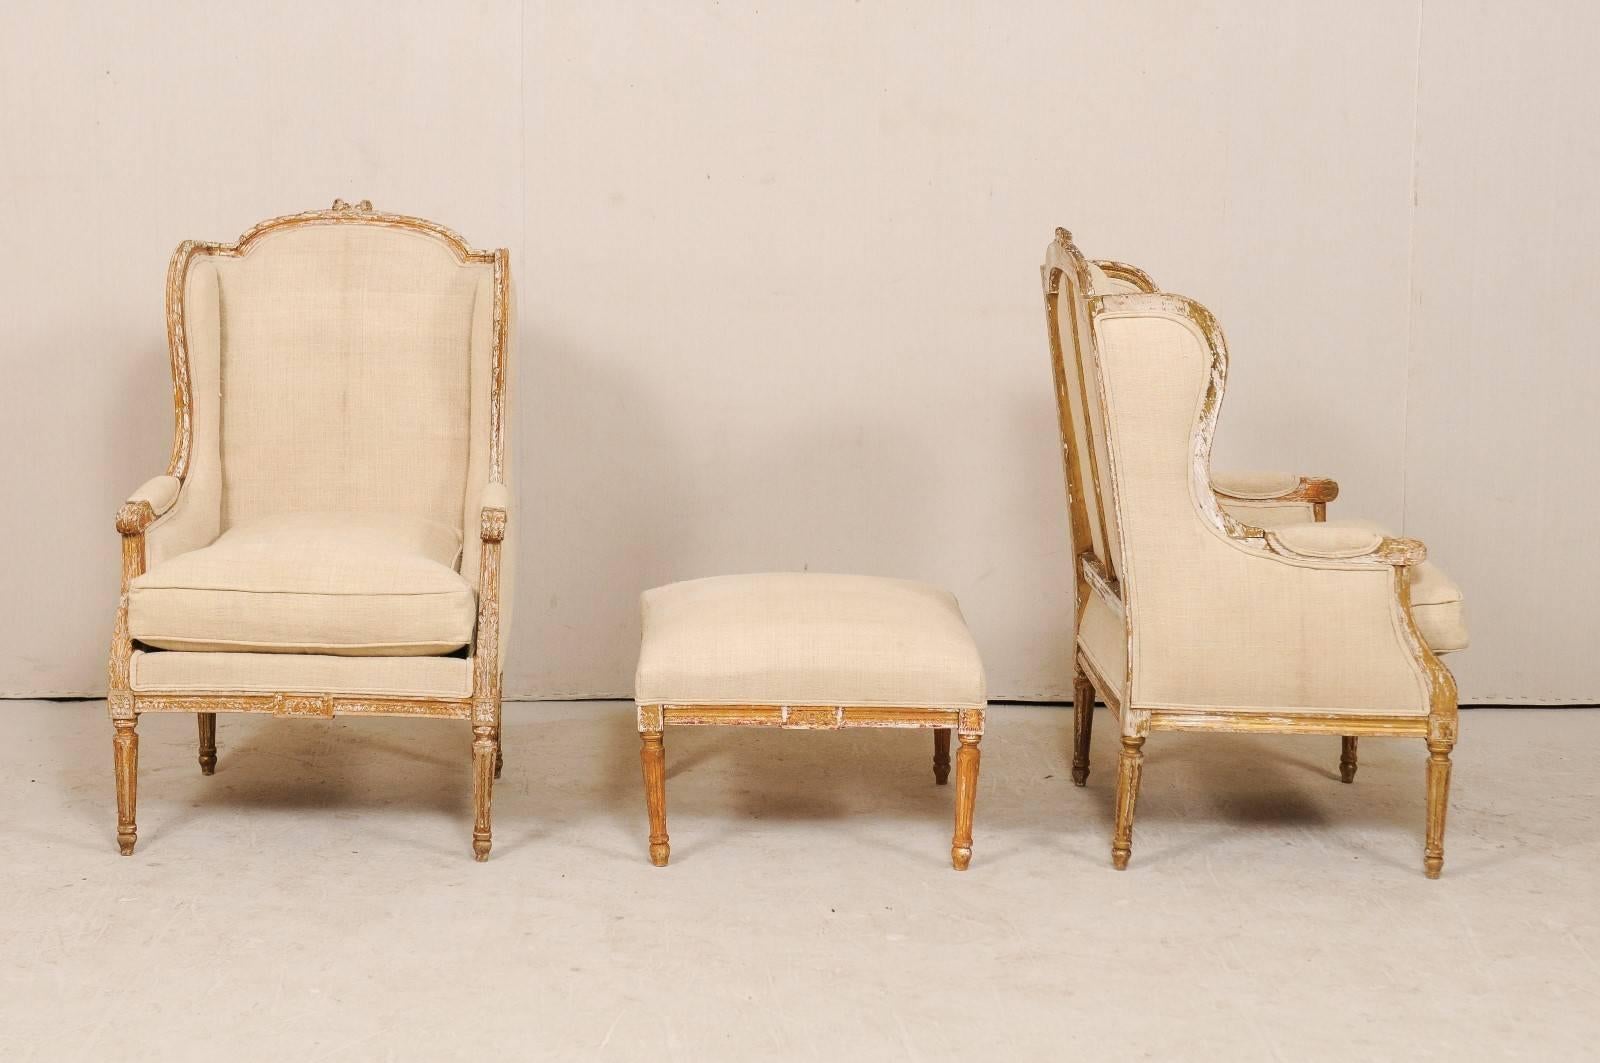 Upholstery Pair of French Louis XVI Style Wood Wing-Back Bergère or Armchairs with Ottoman